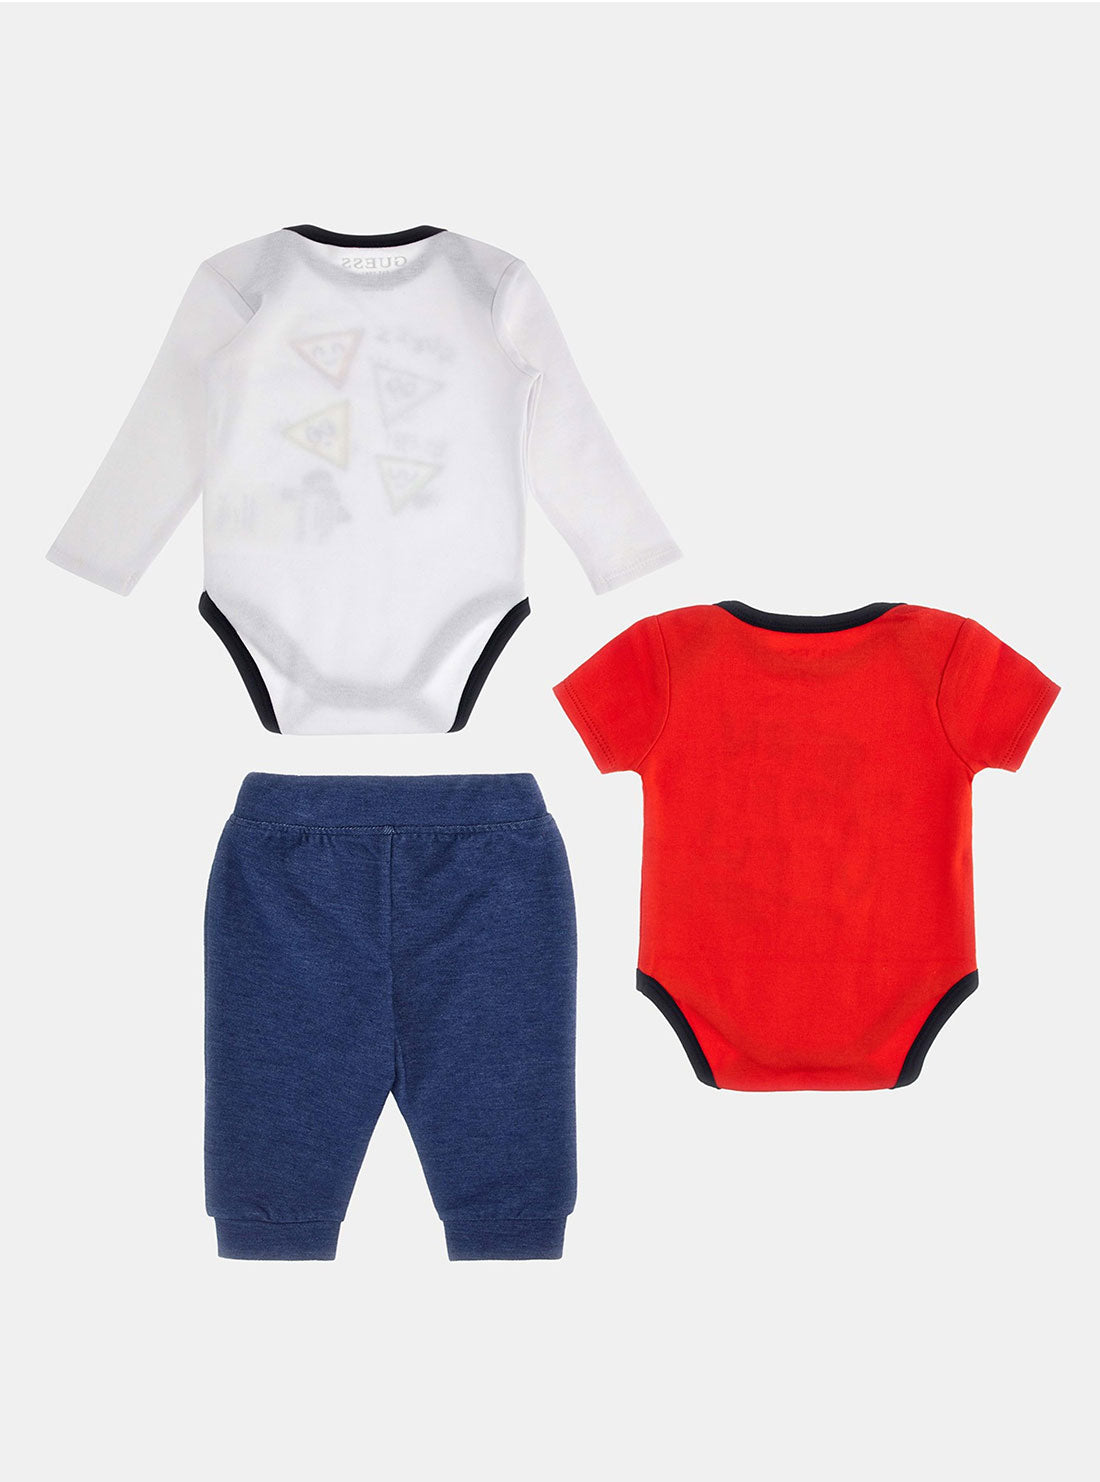 GUESS Red White Short Sleeve Long Sleeve Pants Set (0-12M) back view